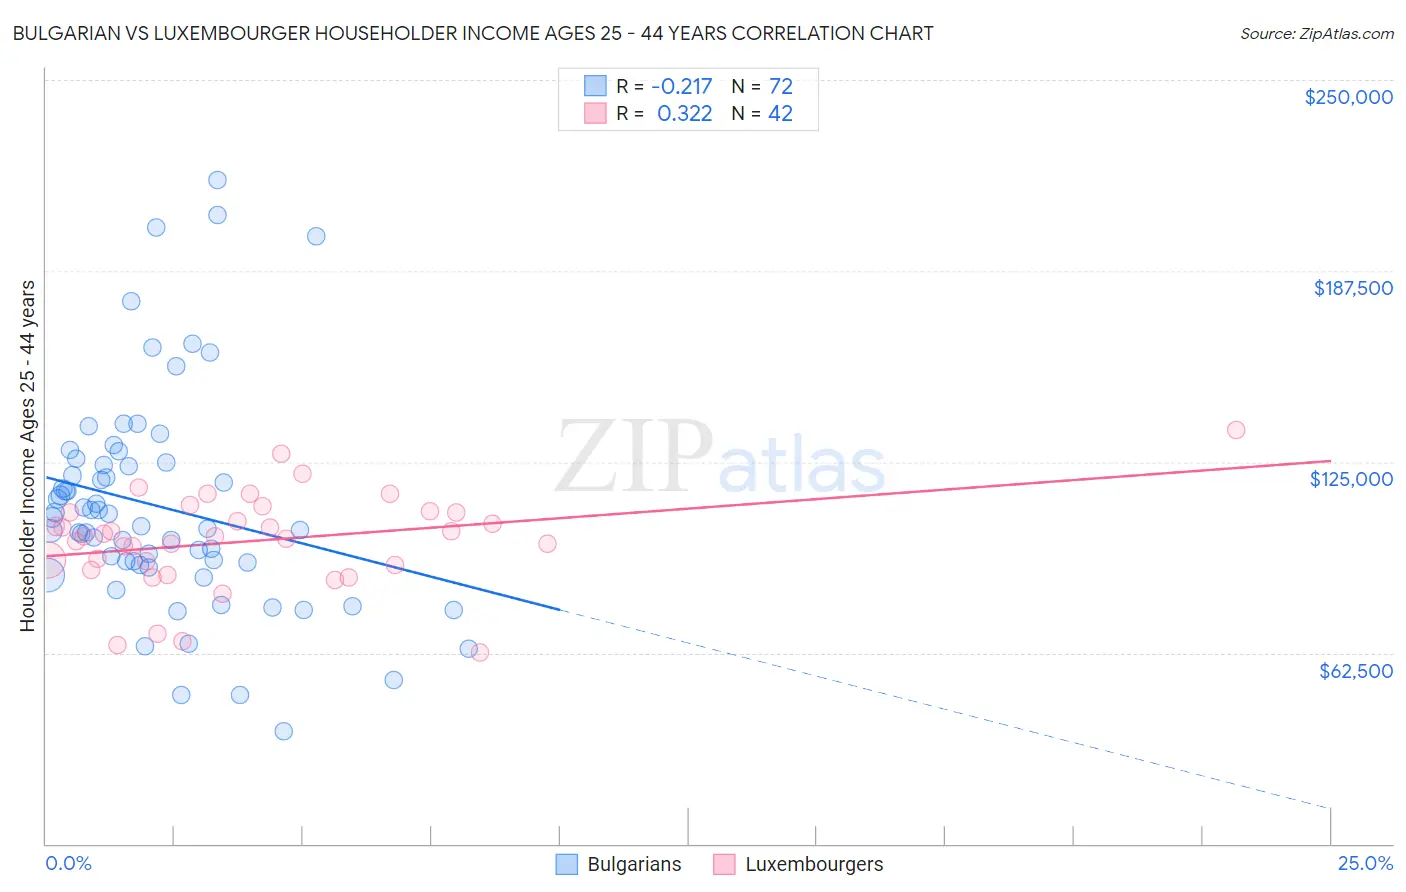 Bulgarian vs Luxembourger Householder Income Ages 25 - 44 years